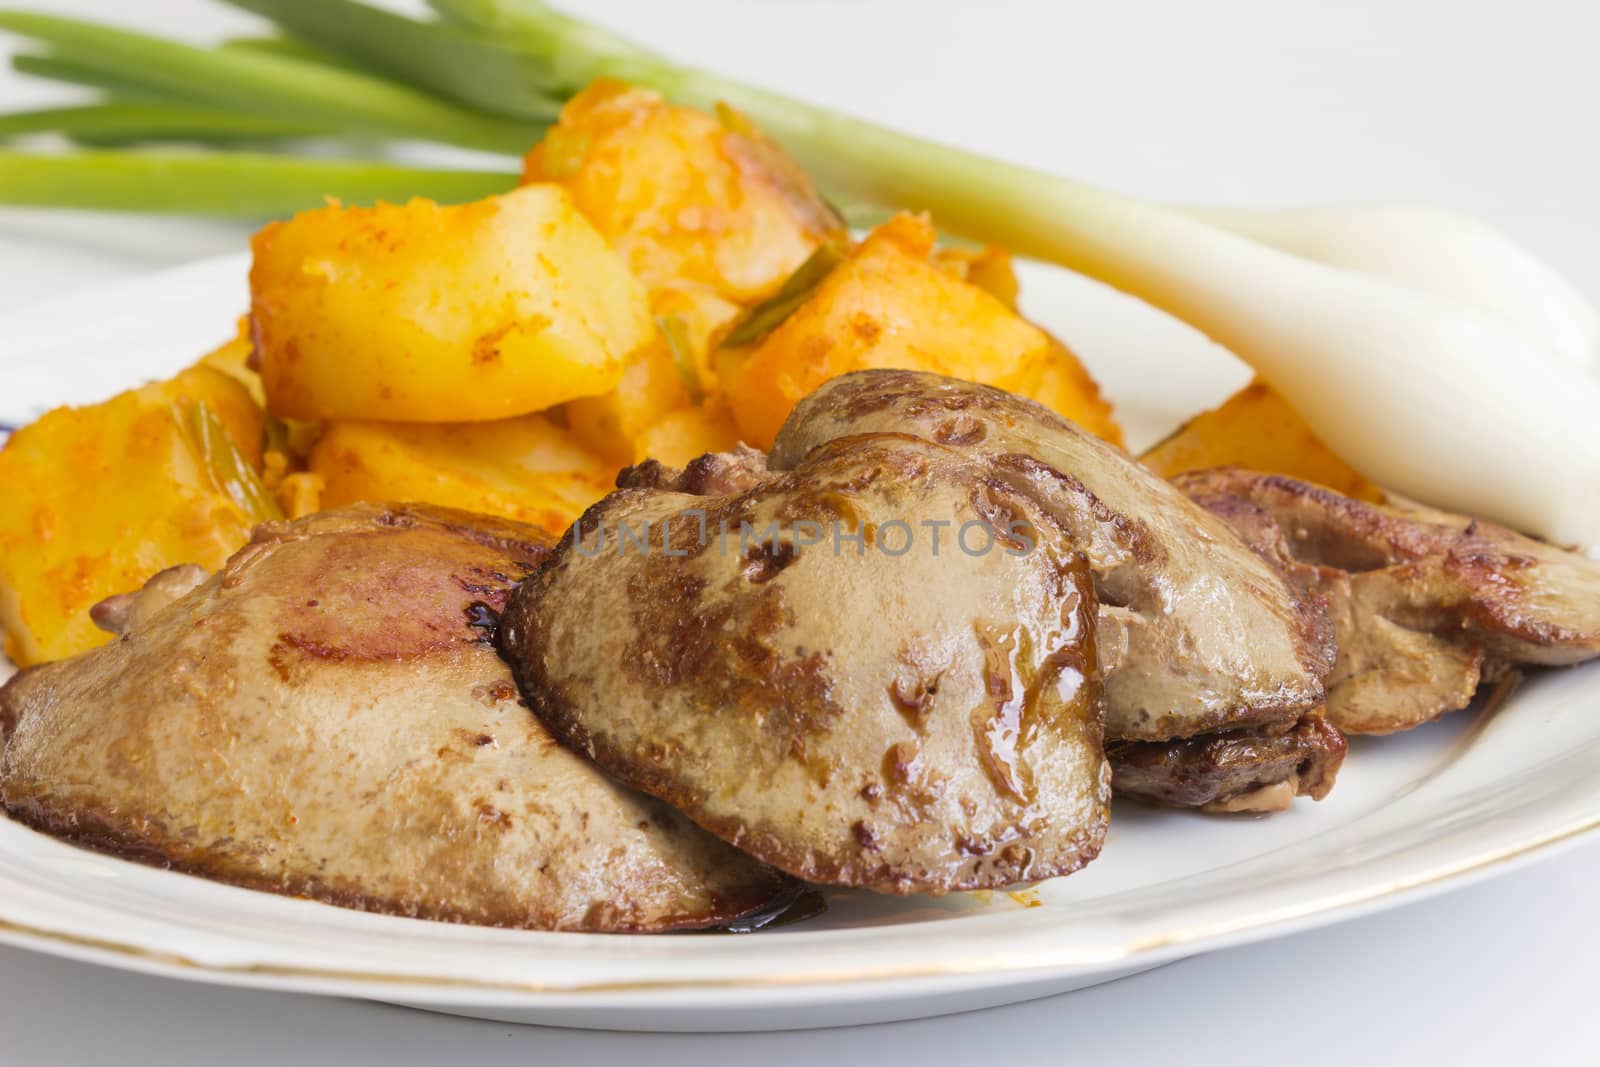 Fried liver served with potatoes and onions